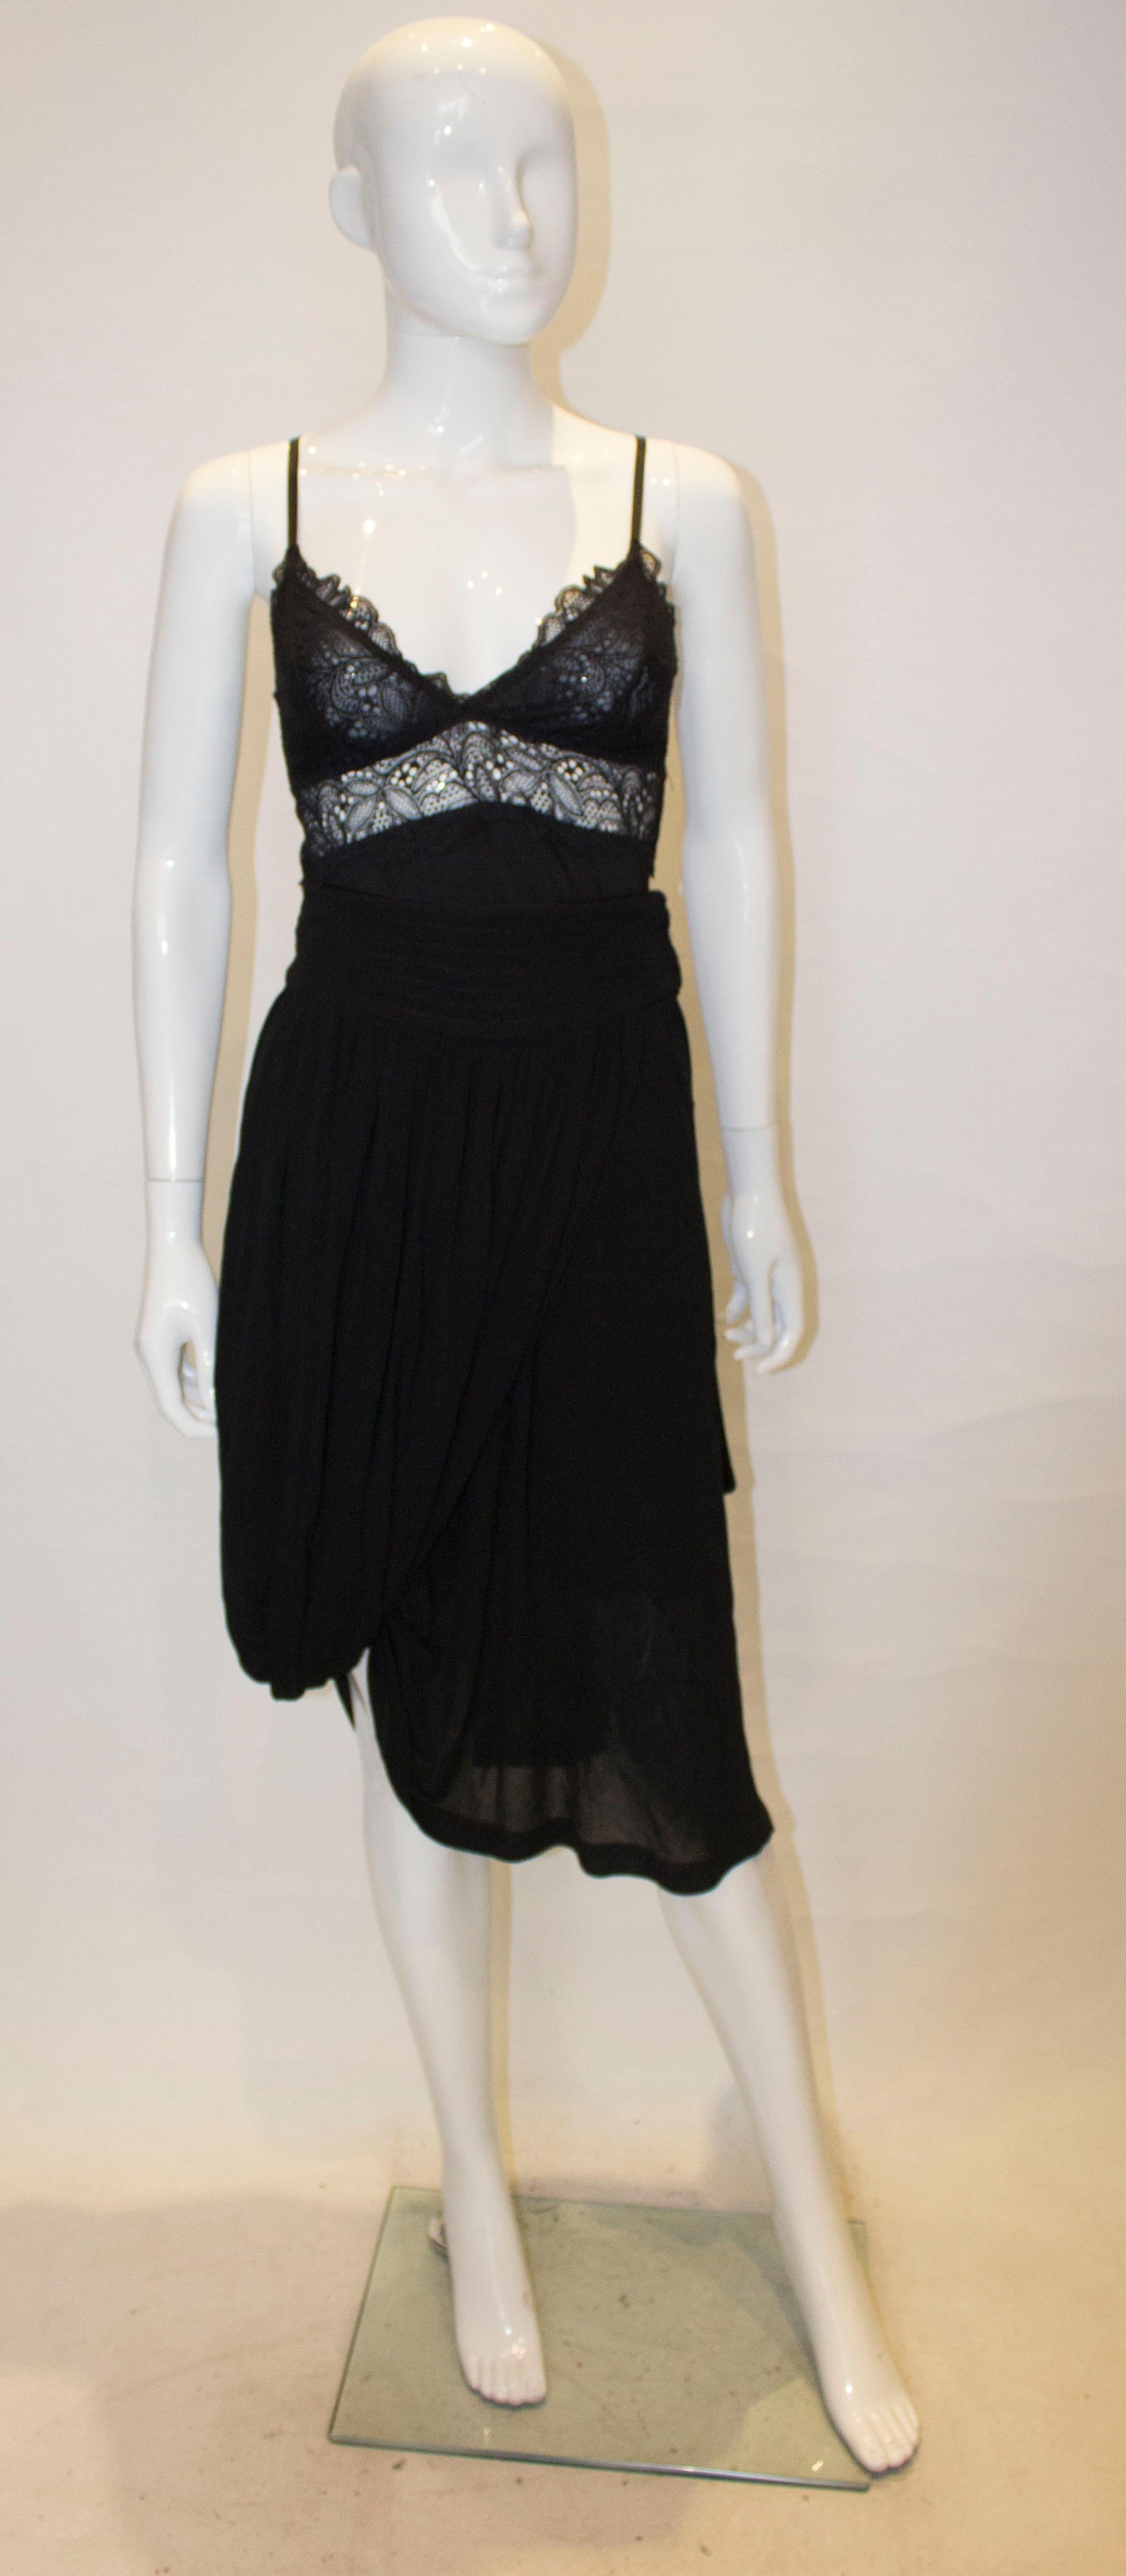 A fun black skirt by Jean Paul Gaultier, Femme line.  The skirt has a wide waistband with popper fastening, and a fold of fabric over one side.